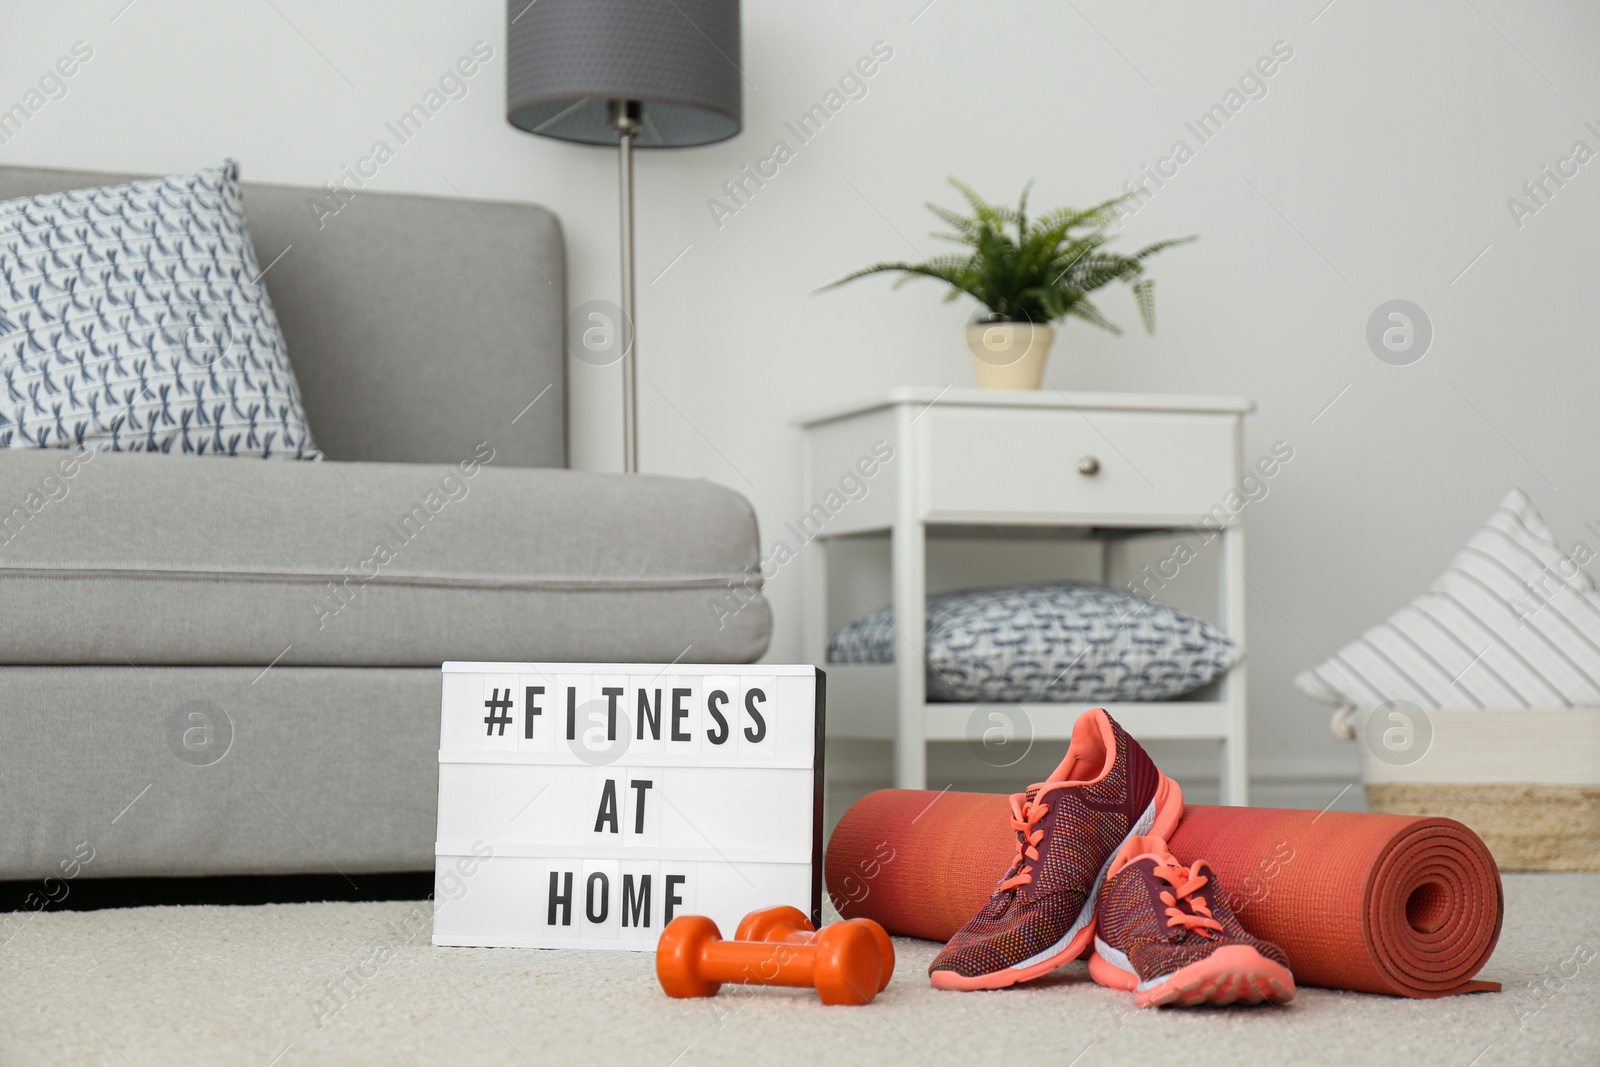 Photo of Sport equipment and lightbox with hashtag FITNESS AT HOME on floor indoors. Message to promote self-isolation during COVID‑19 pandemic